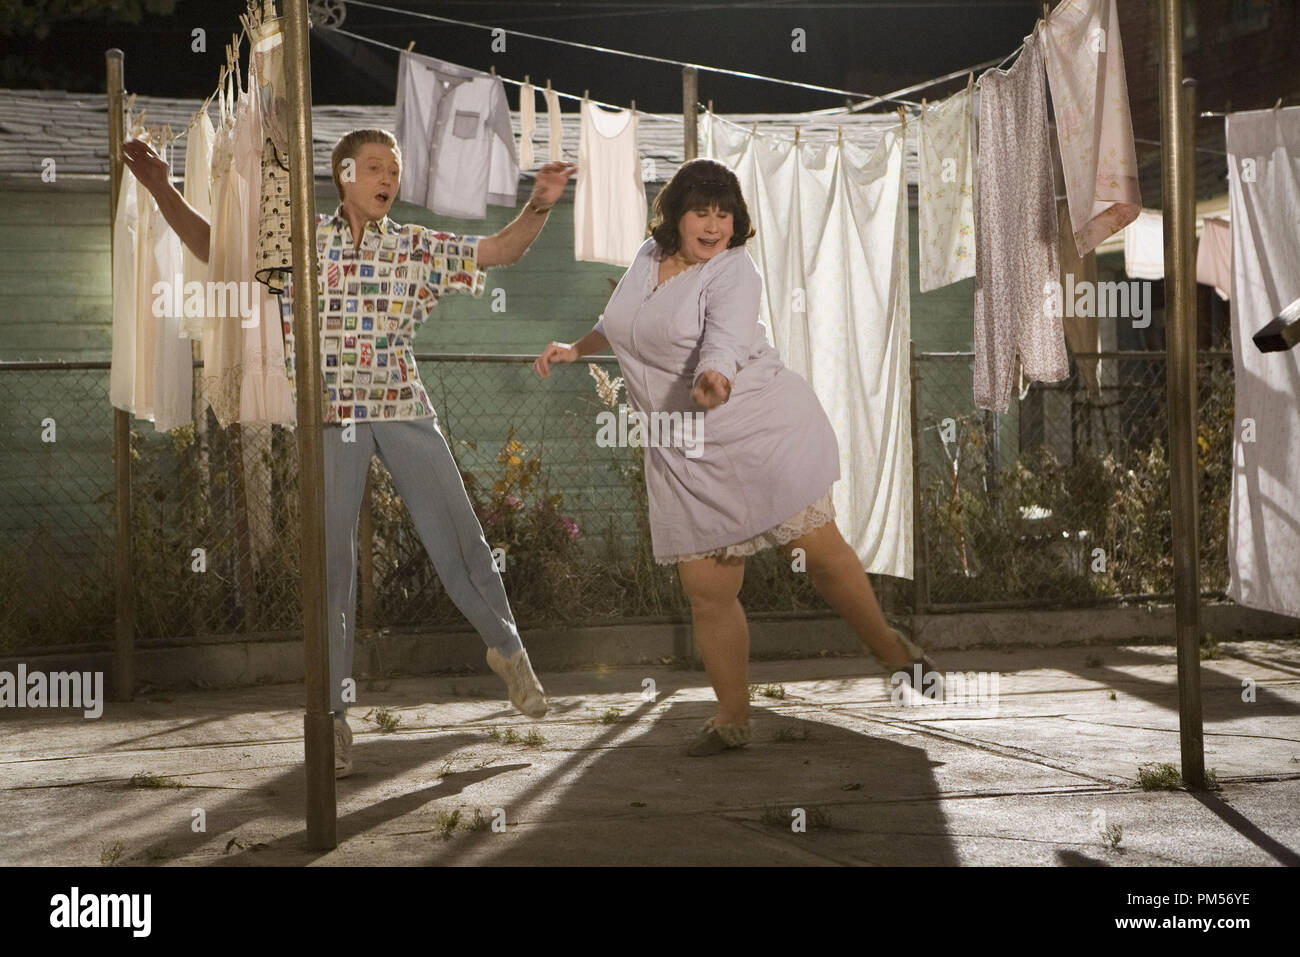 Film Still from "Hairspray" Christopher Walken, John Travolta © 2007 New Line Cinema Photo Credit: David James  File Reference # 307351405THA  For Editorial Use Only -  All Rights Reserved Stock Photo